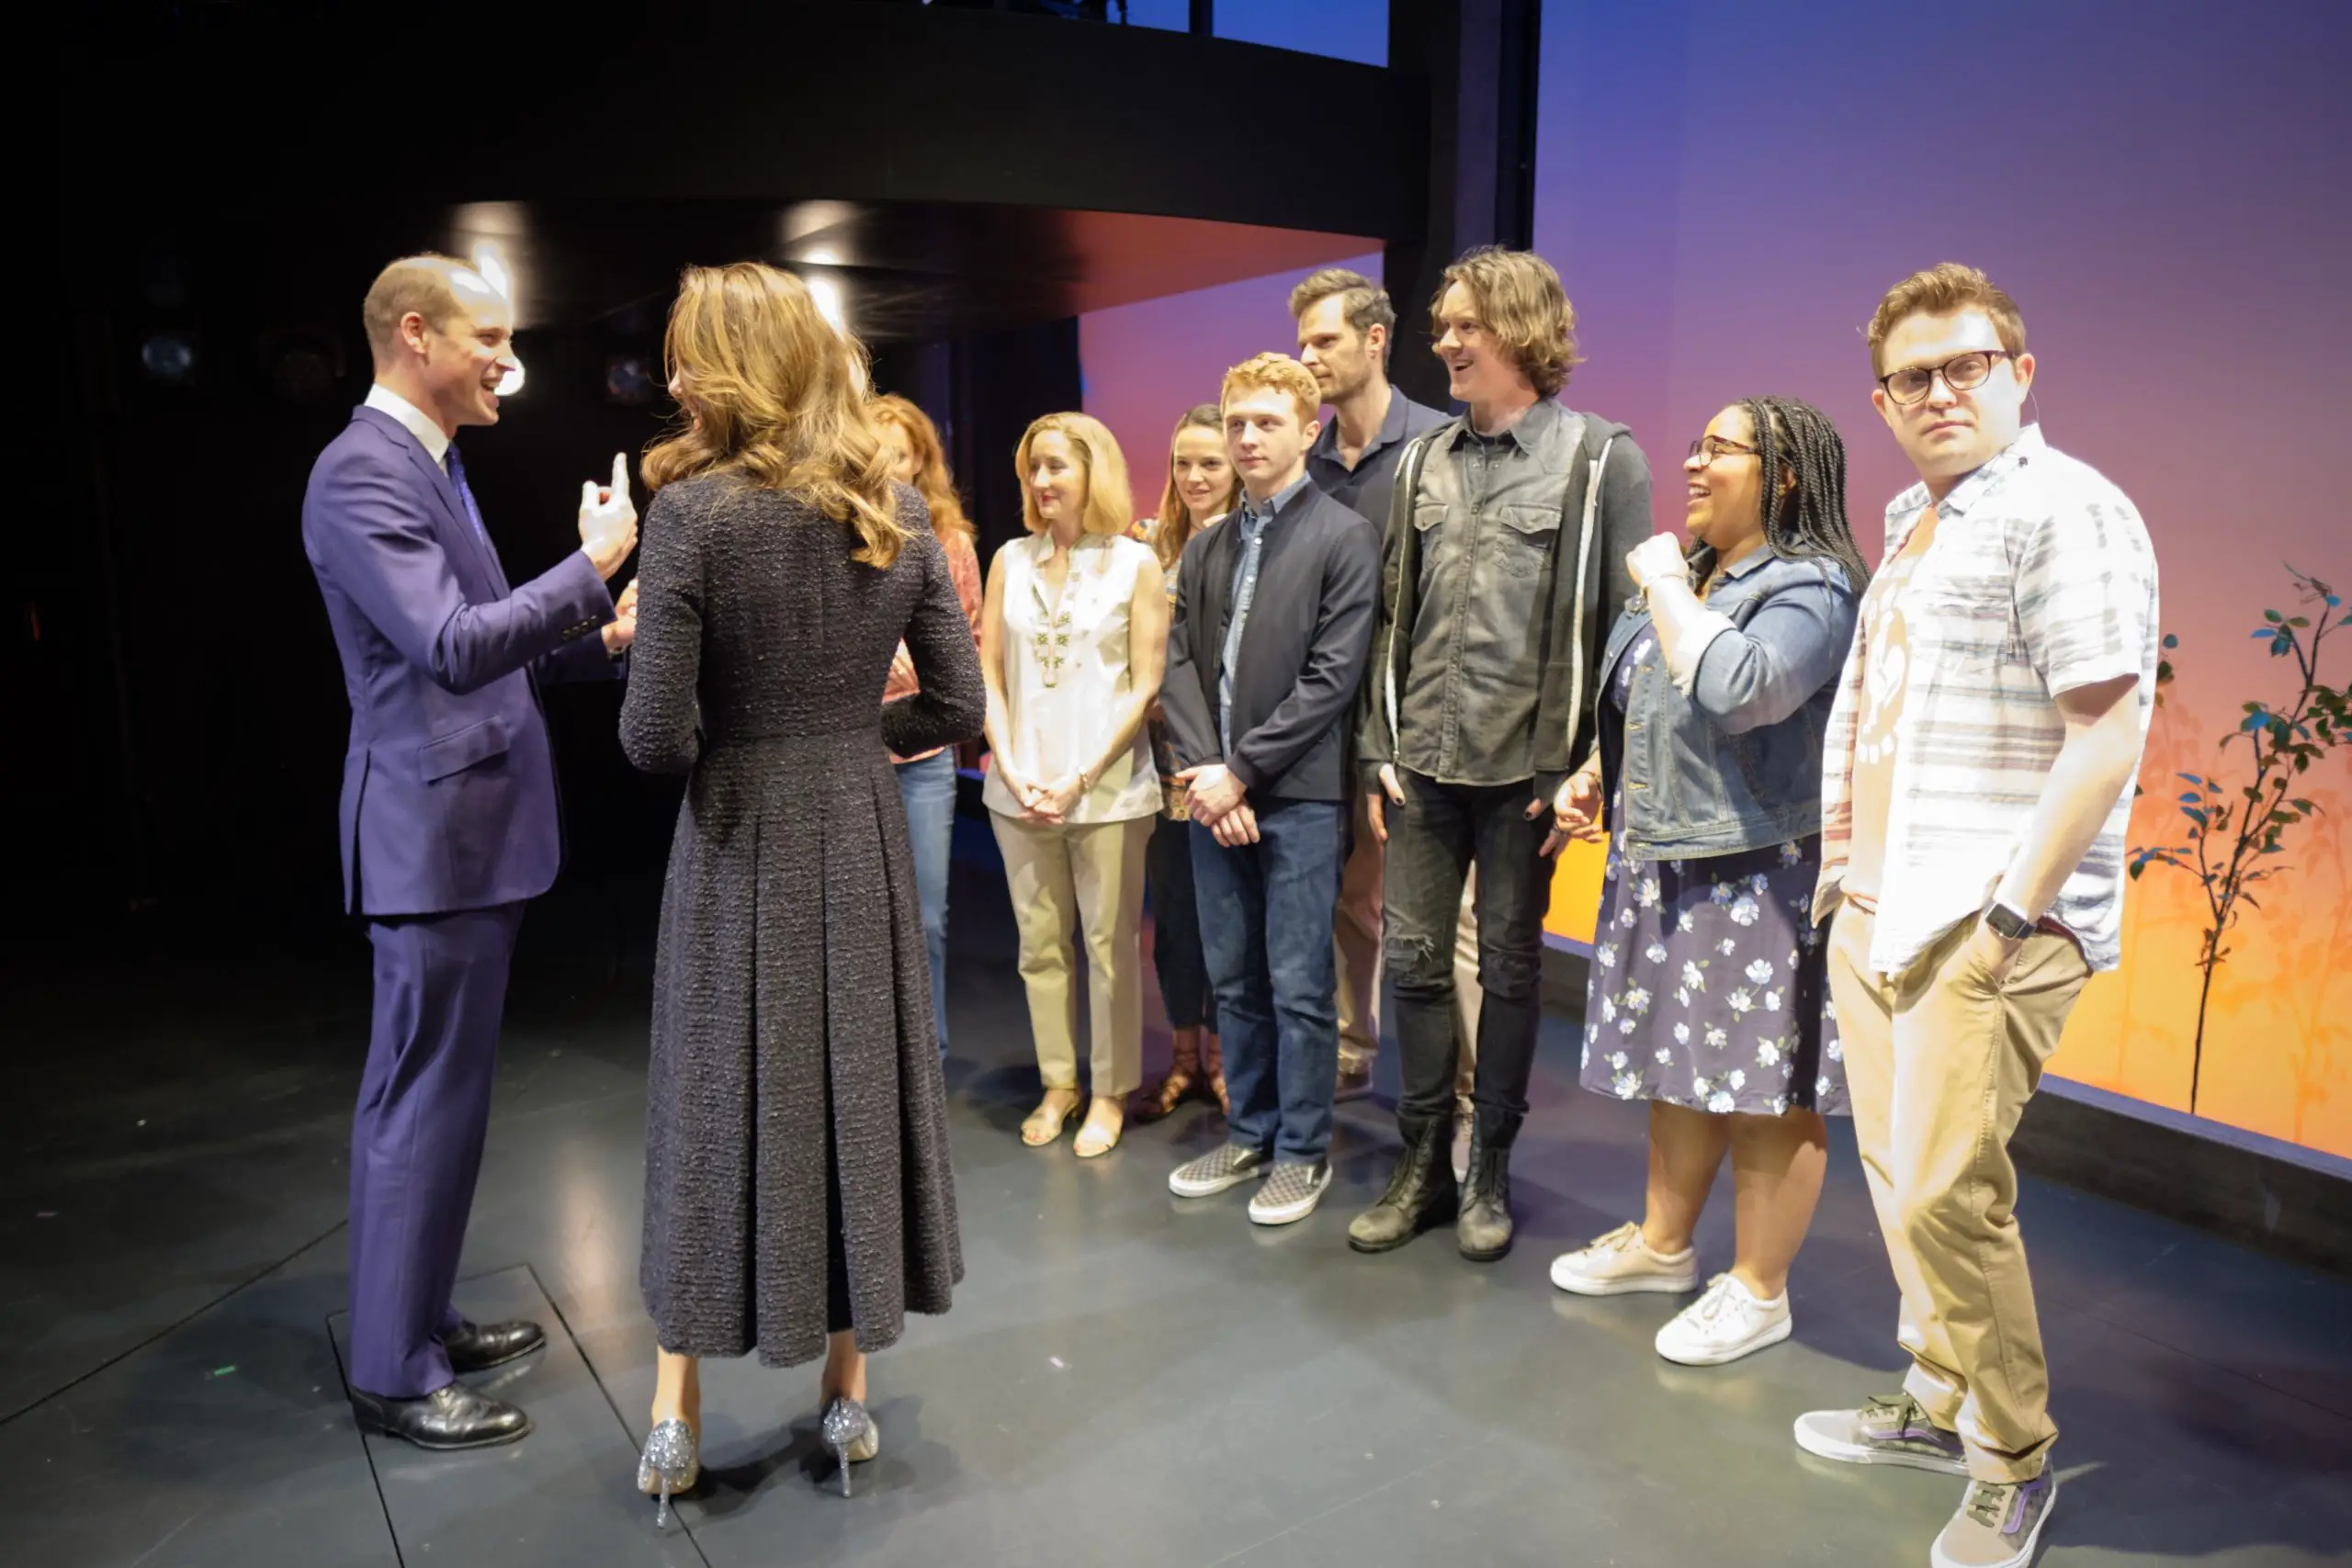 The Duke and Duchess of Cambridge attended a special performance of Dear Evan Hansen' at the Noël Coward Theatre and met with the cast